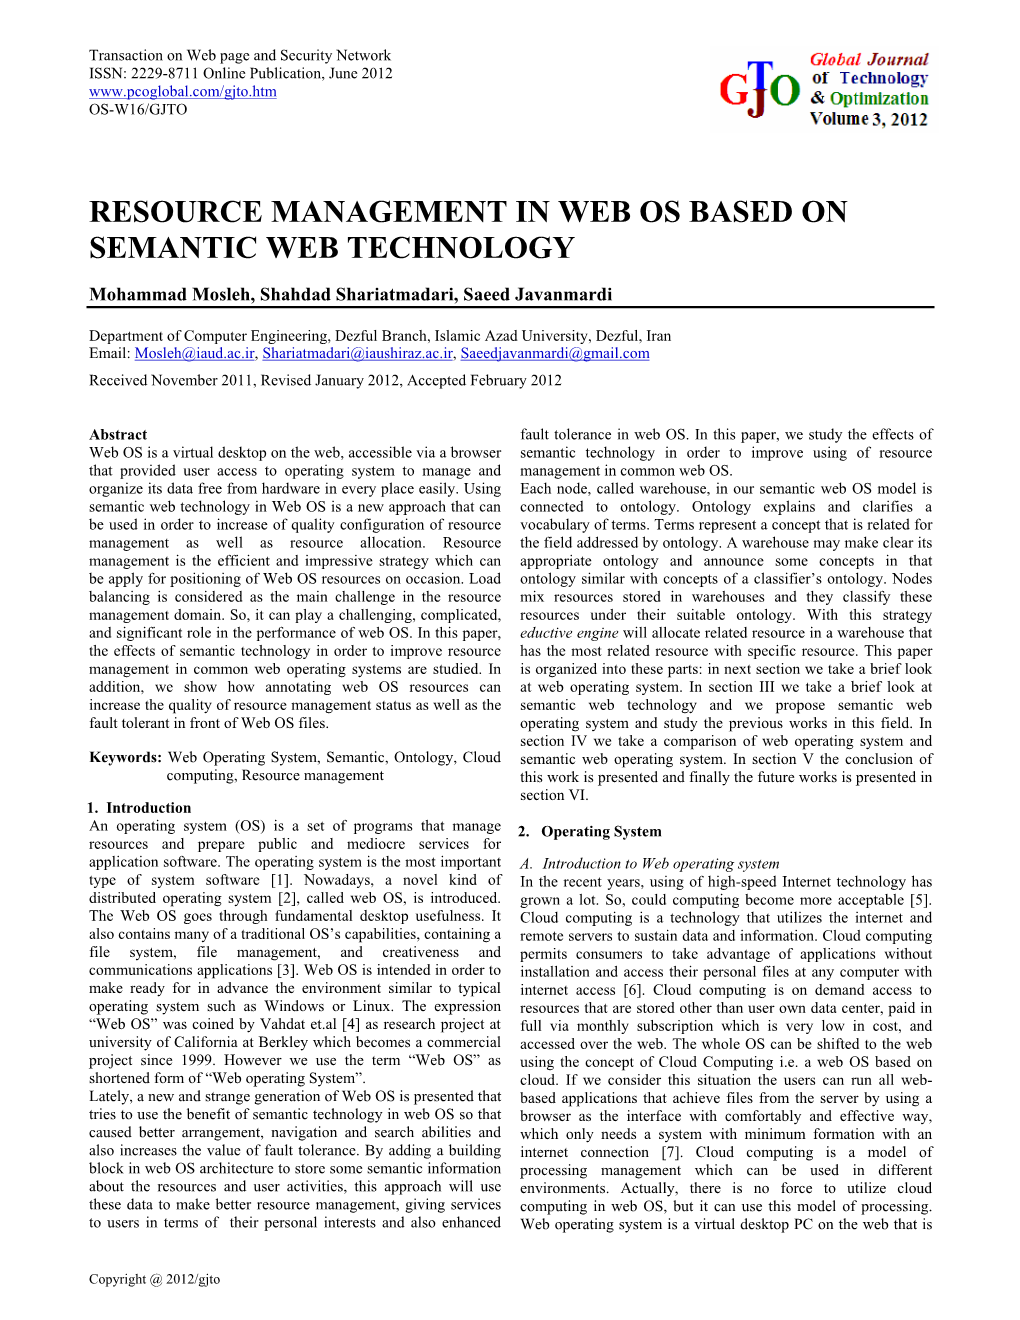 Resource Management in Web Os Based on Semantic Web Technology